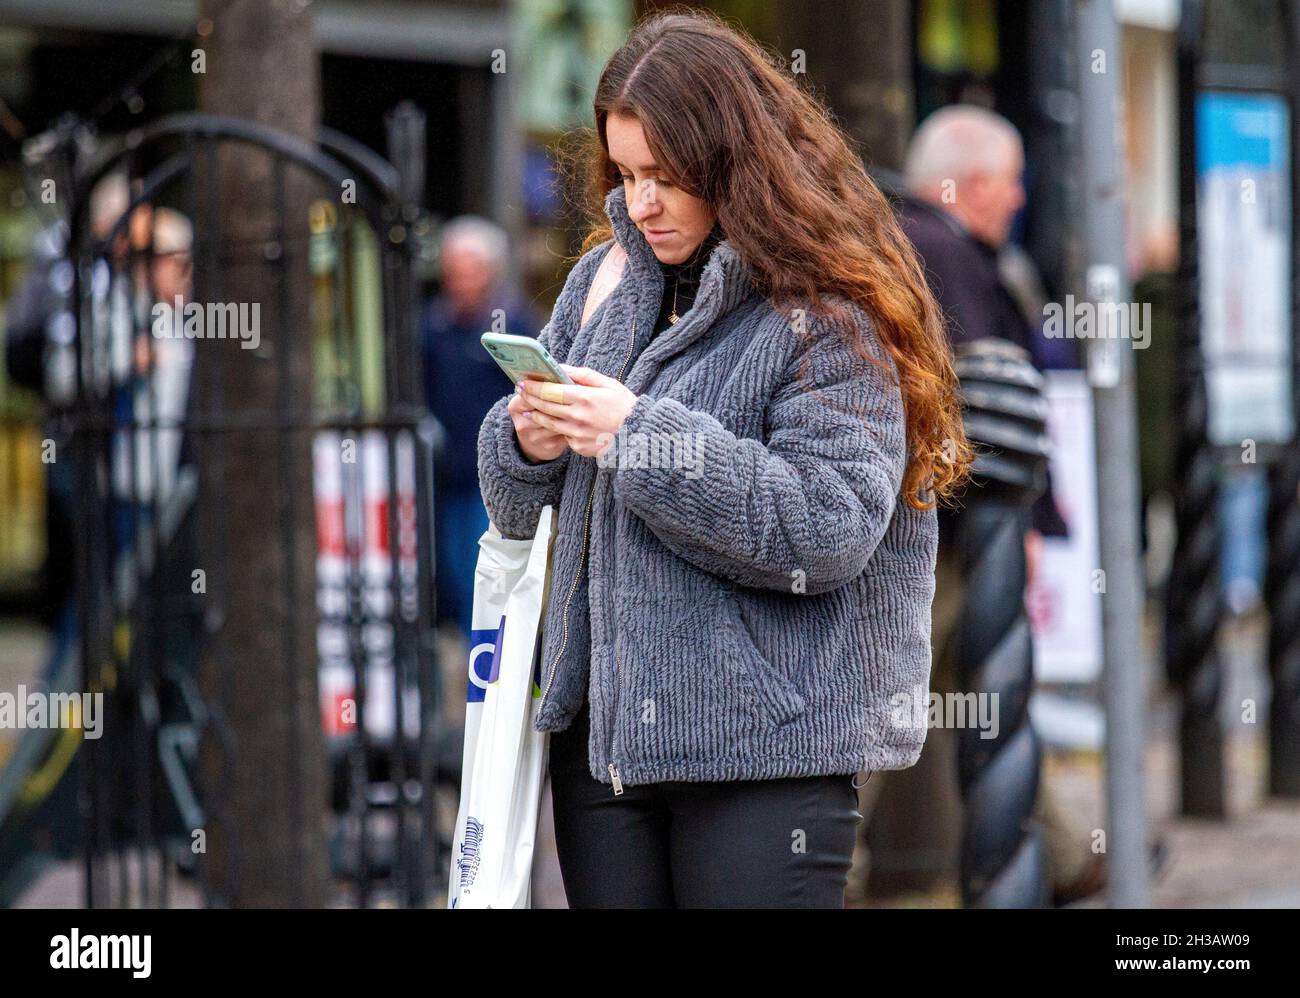 Dundee, Tayside, Scotland, UK. 27th Oct, 2021. UK Weather: A mild Autumn day with some sunny spells across North East Scotland, temperatures reaching 15°C. An attractive woman is spending the day out enjoying the October weather whilst texting messages on her mobile phone in Dundee city centre. Credit: Dundee Photographics/Alamy Live News Stock Photo